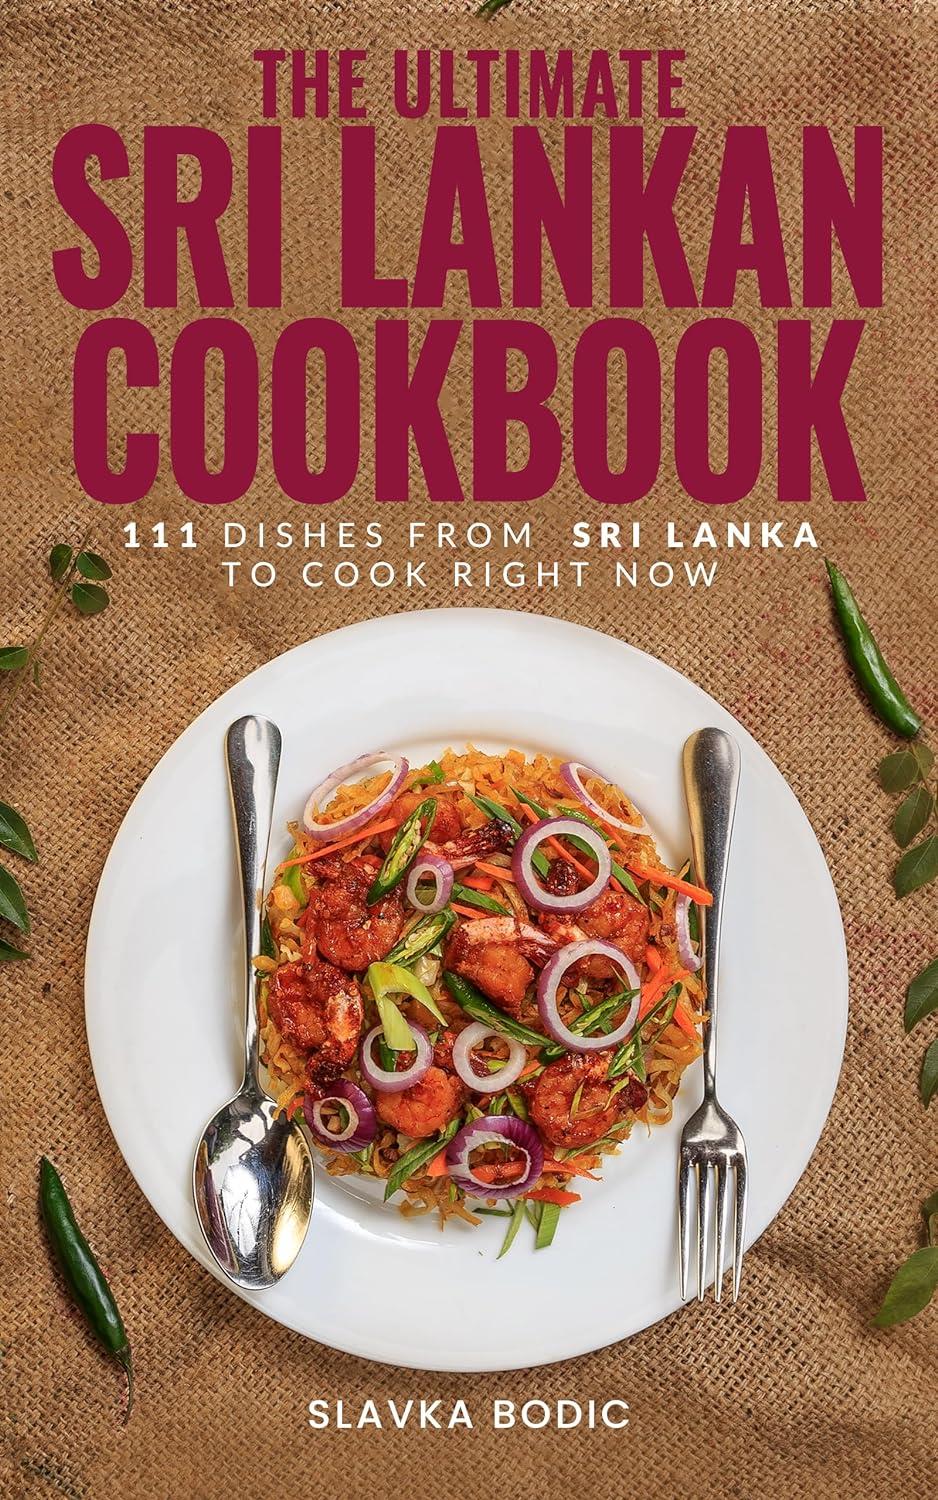 The Ultimate Sri Lankan Cookbook 111 Dishes From Sri Lanka To Cook Right Now Softarchive 